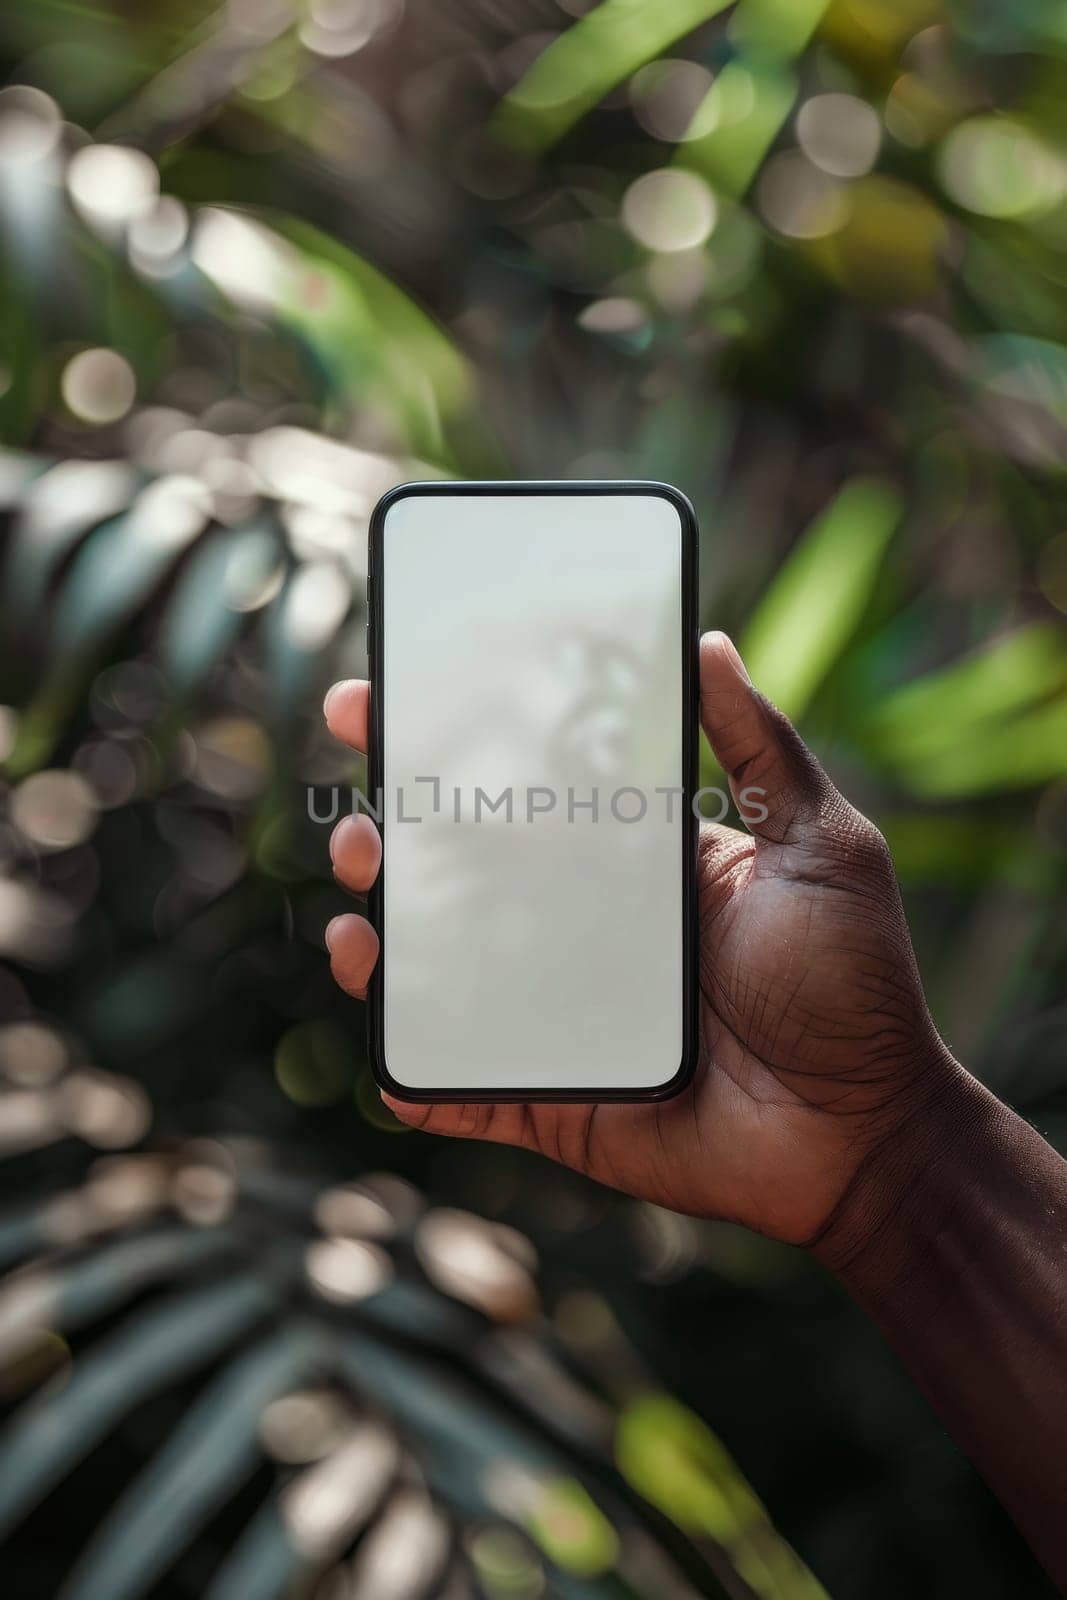 A person is holding a phone with a white screen. The phone is a new model and he is a high-end device